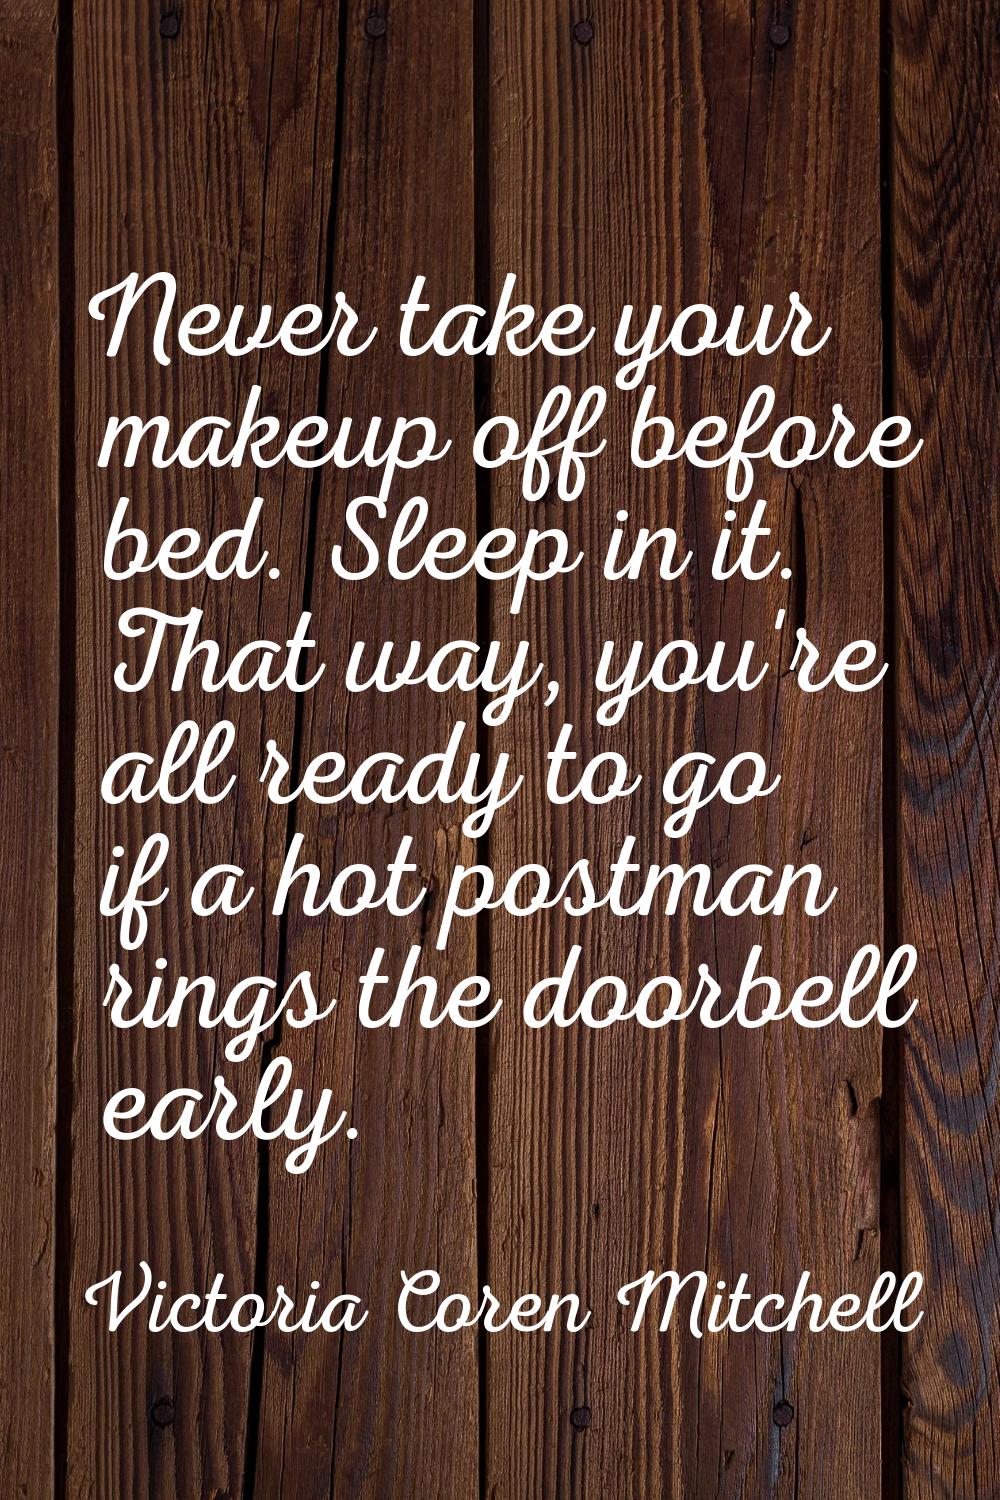 Never take your makeup off before bed. Sleep in it. That way, you're all ready to go if a hot postm